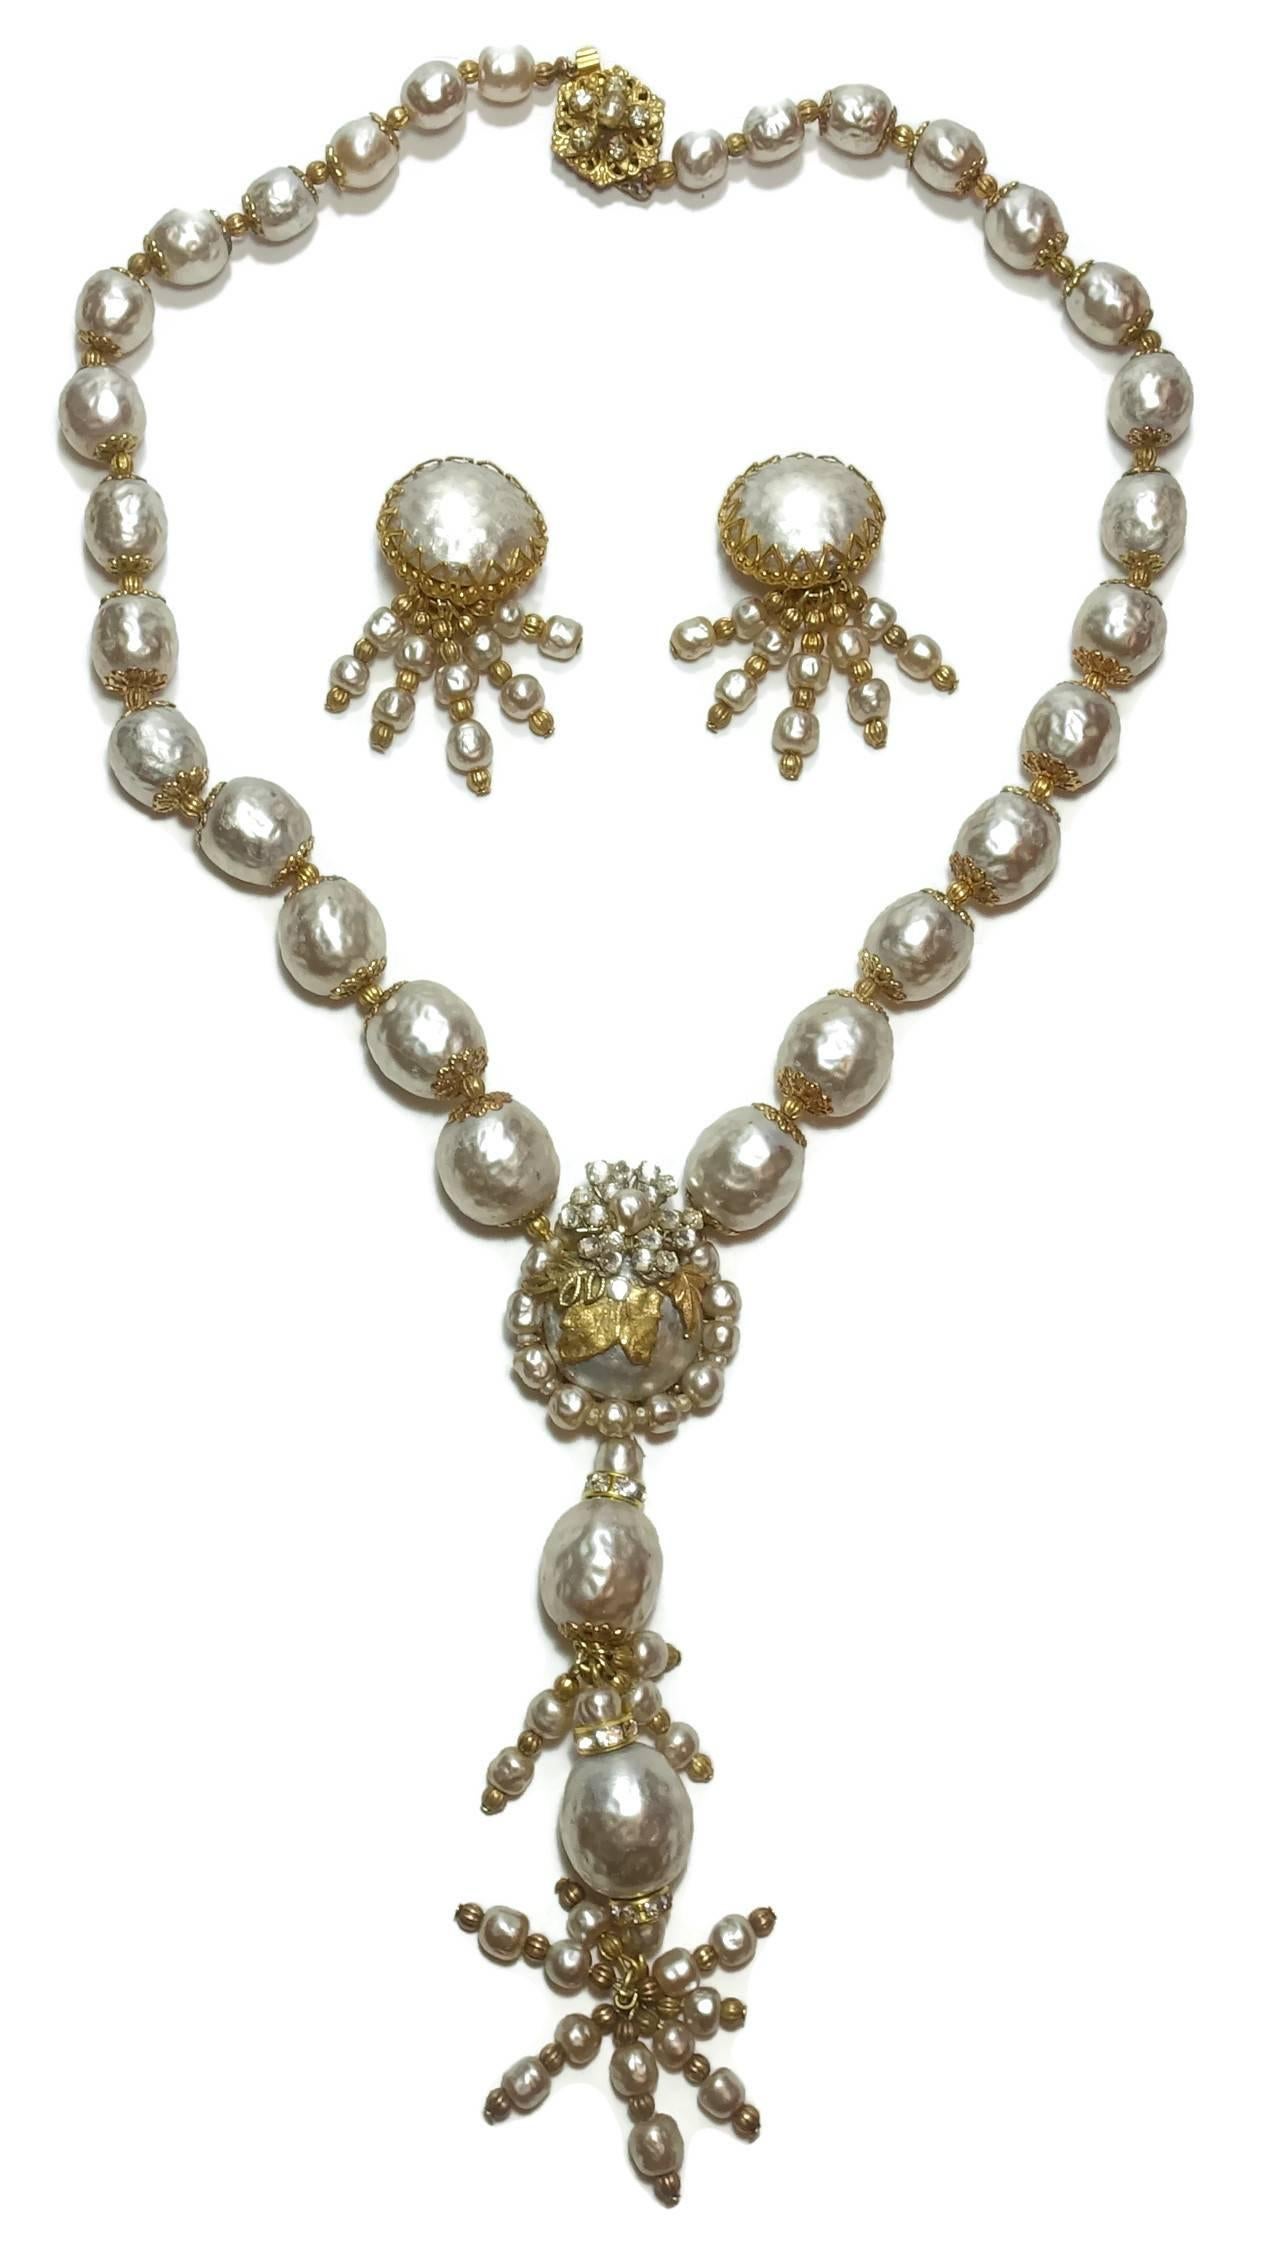 It’s not often I find such a beautiful Haskell set like this.  The necklace has graduated baroque faux pearls leading down to the main centerpiece drop.  The top of the centerpiece has rose montees surrounding a center pearl.  Gold tone leaves drop